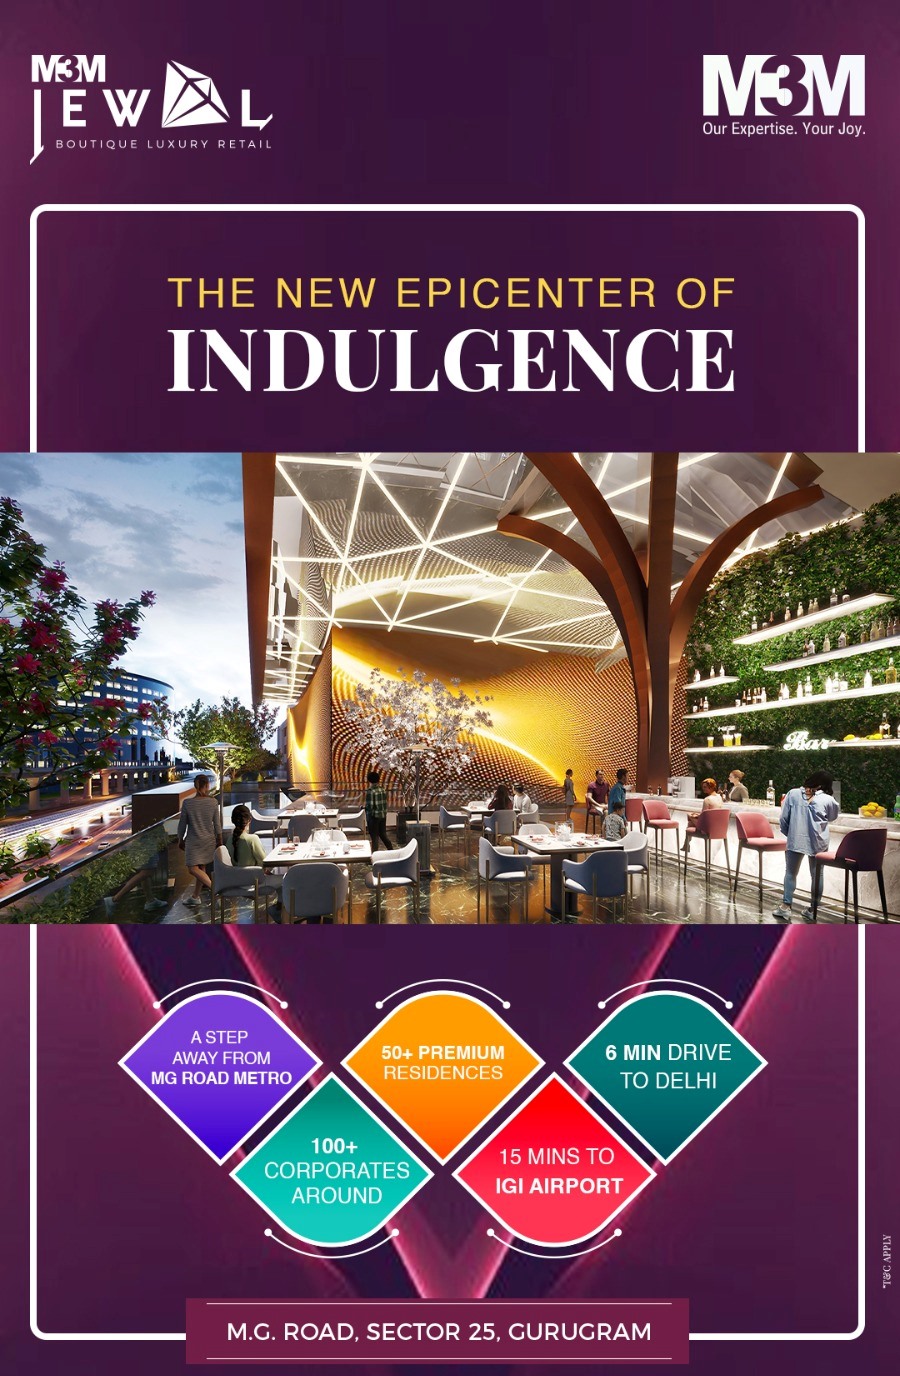 The new epicenter of indulgence at M3M Jewel in Sector 25, Gurgaon